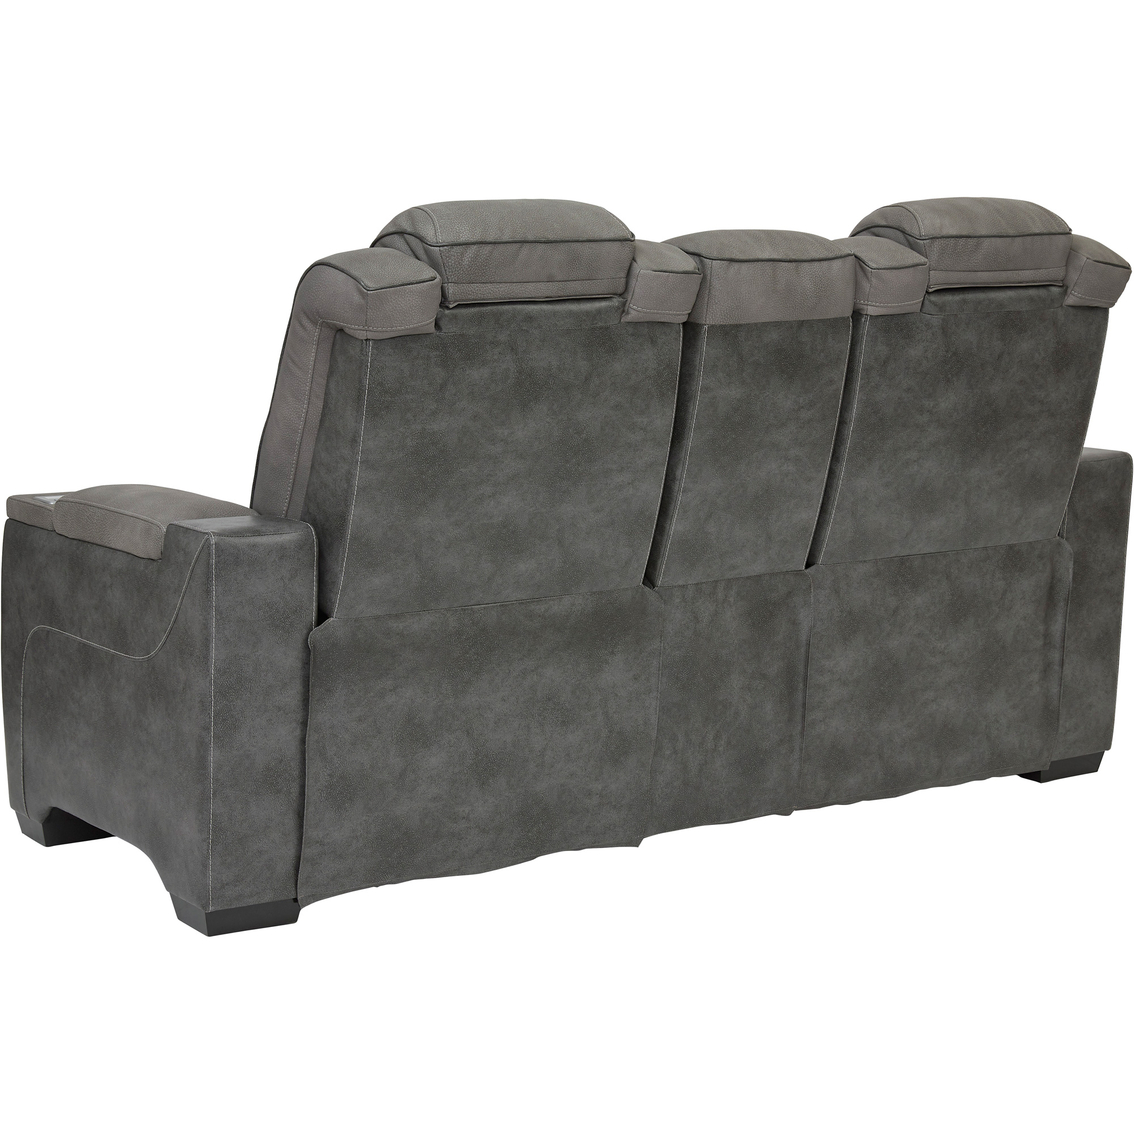 Signature Design by Ashley Next Gen DuraPella Power Reclining Loveseat with Console - Image 2 of 10